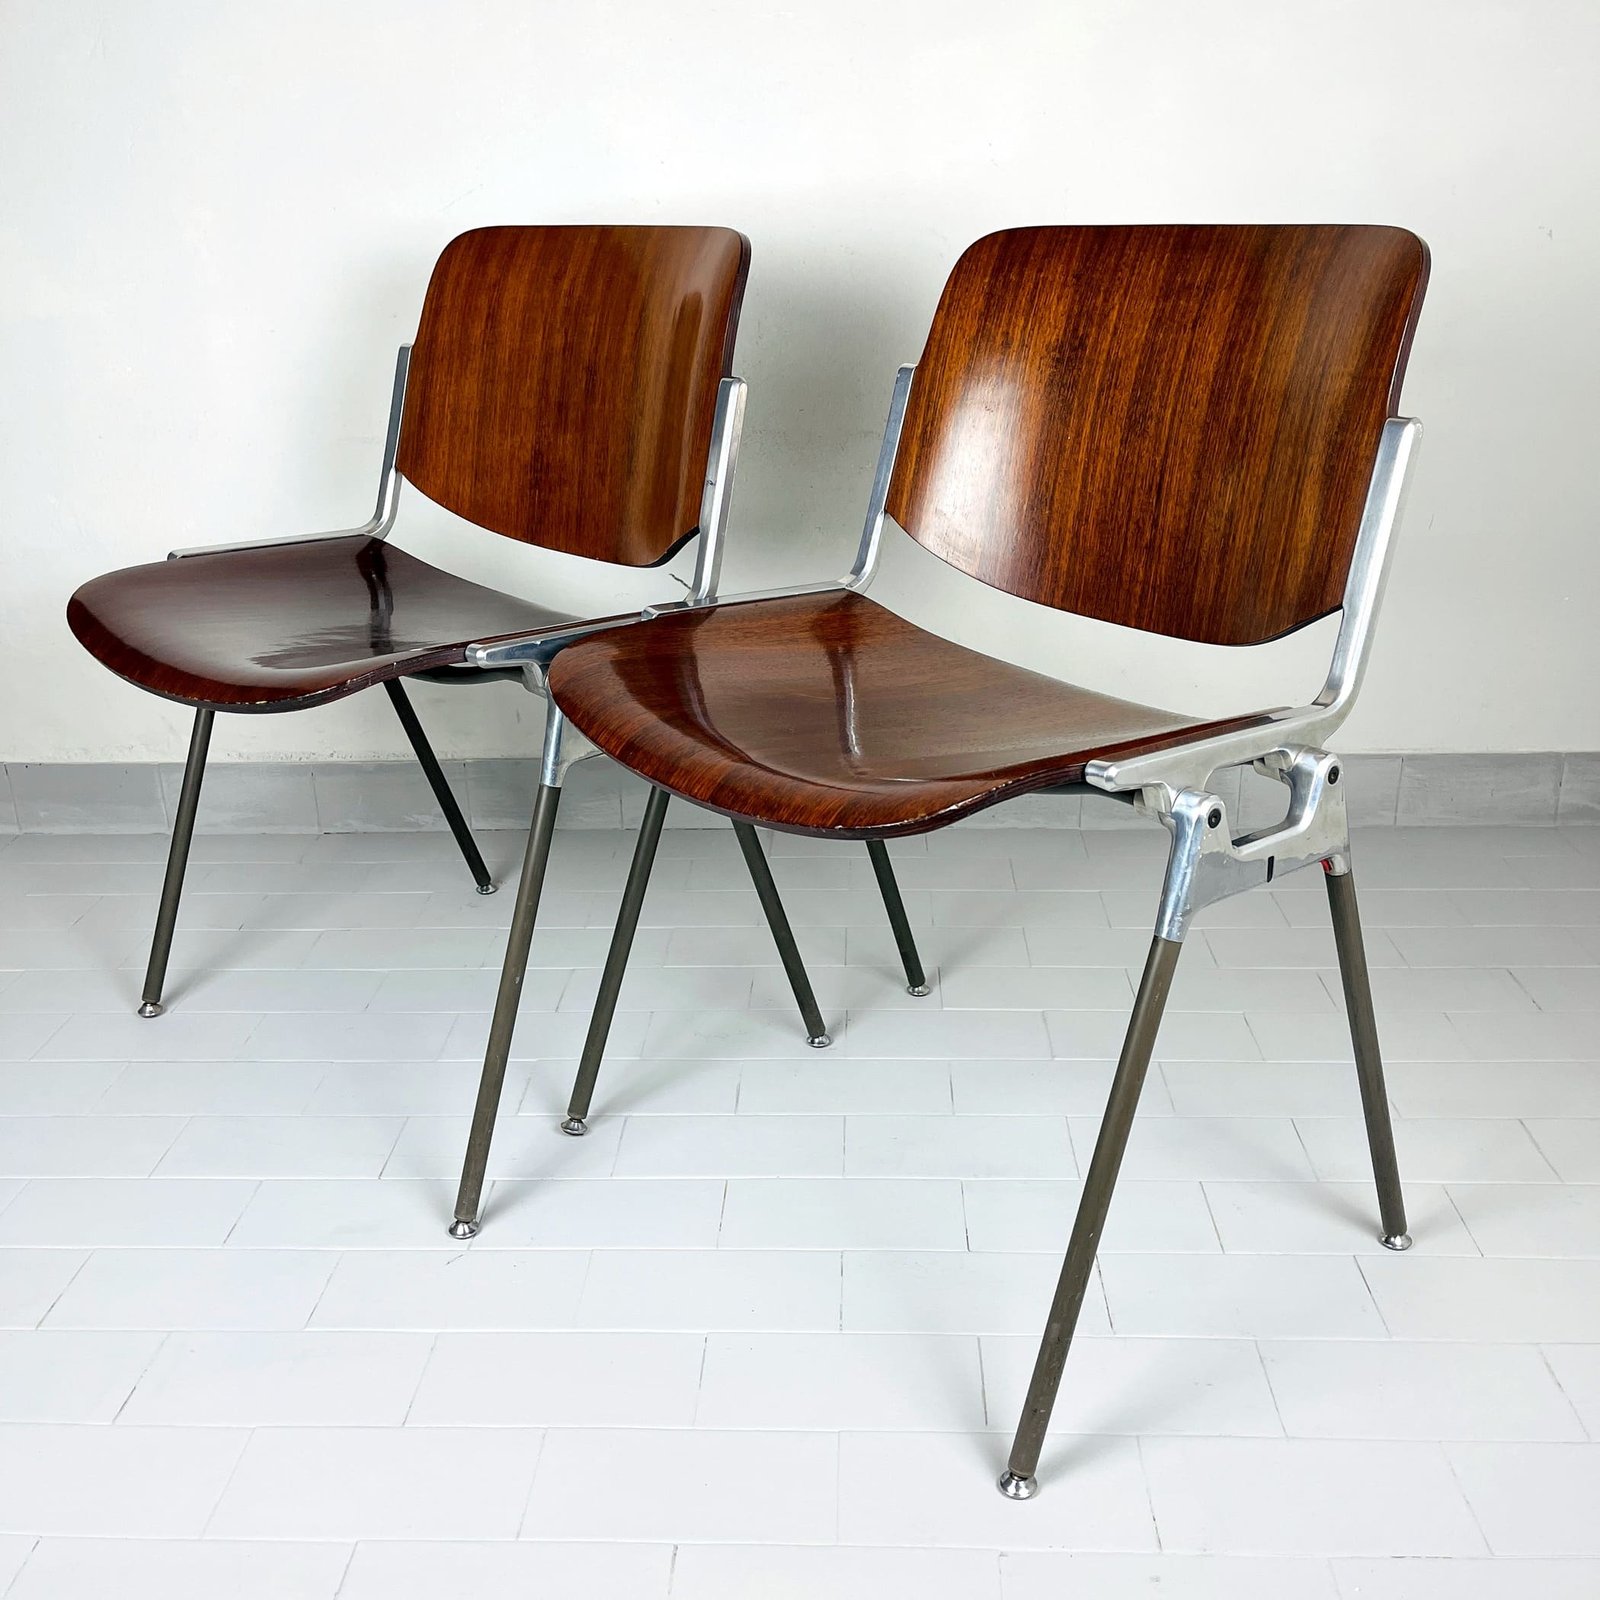 1 of 2 Mid-century Chair DSC 106 by Giancarlo Piretti for Castelli Italy 1960s